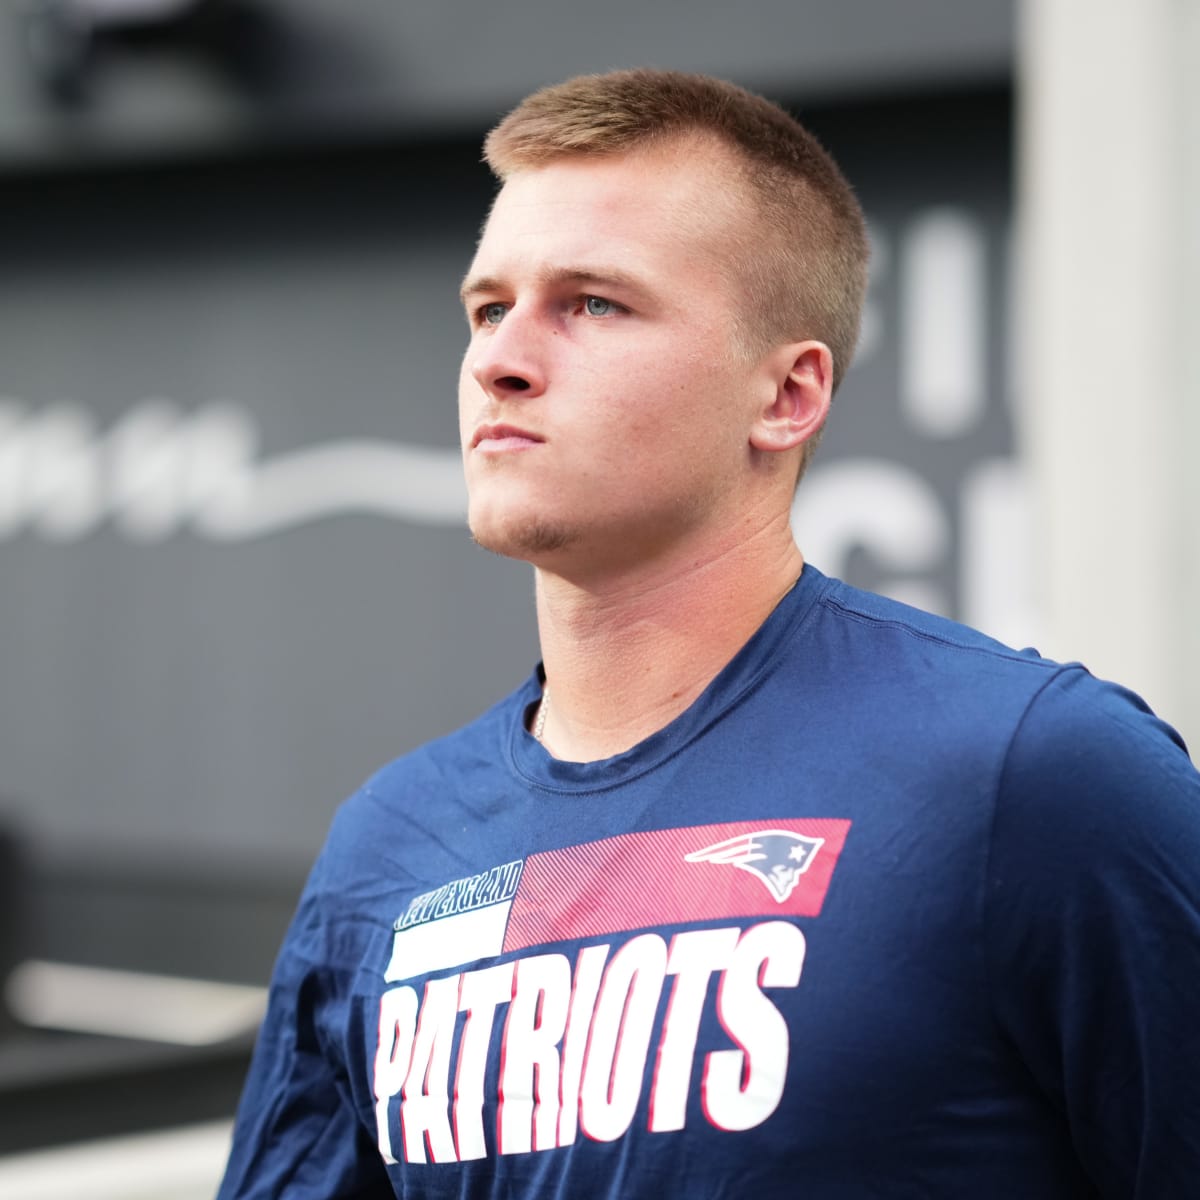 Bailey Zappe leads Patriots on touchdown drive as he replaces Mac